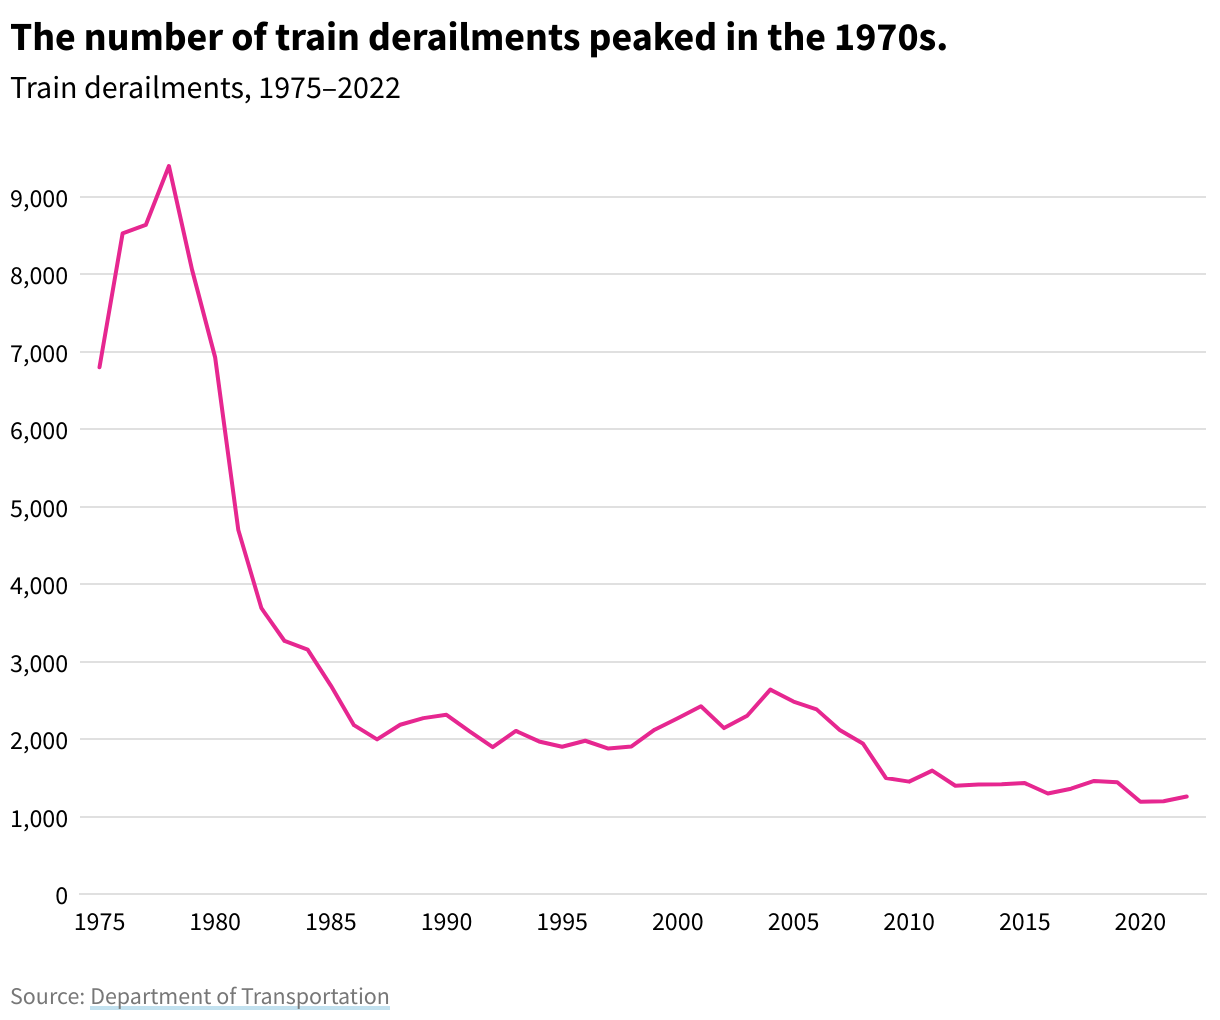 Line chart showing train derailments from 1975 to 2022 with a sharp decline between 1978 and 1987. In 2022, there were 1,259 train derailments. 